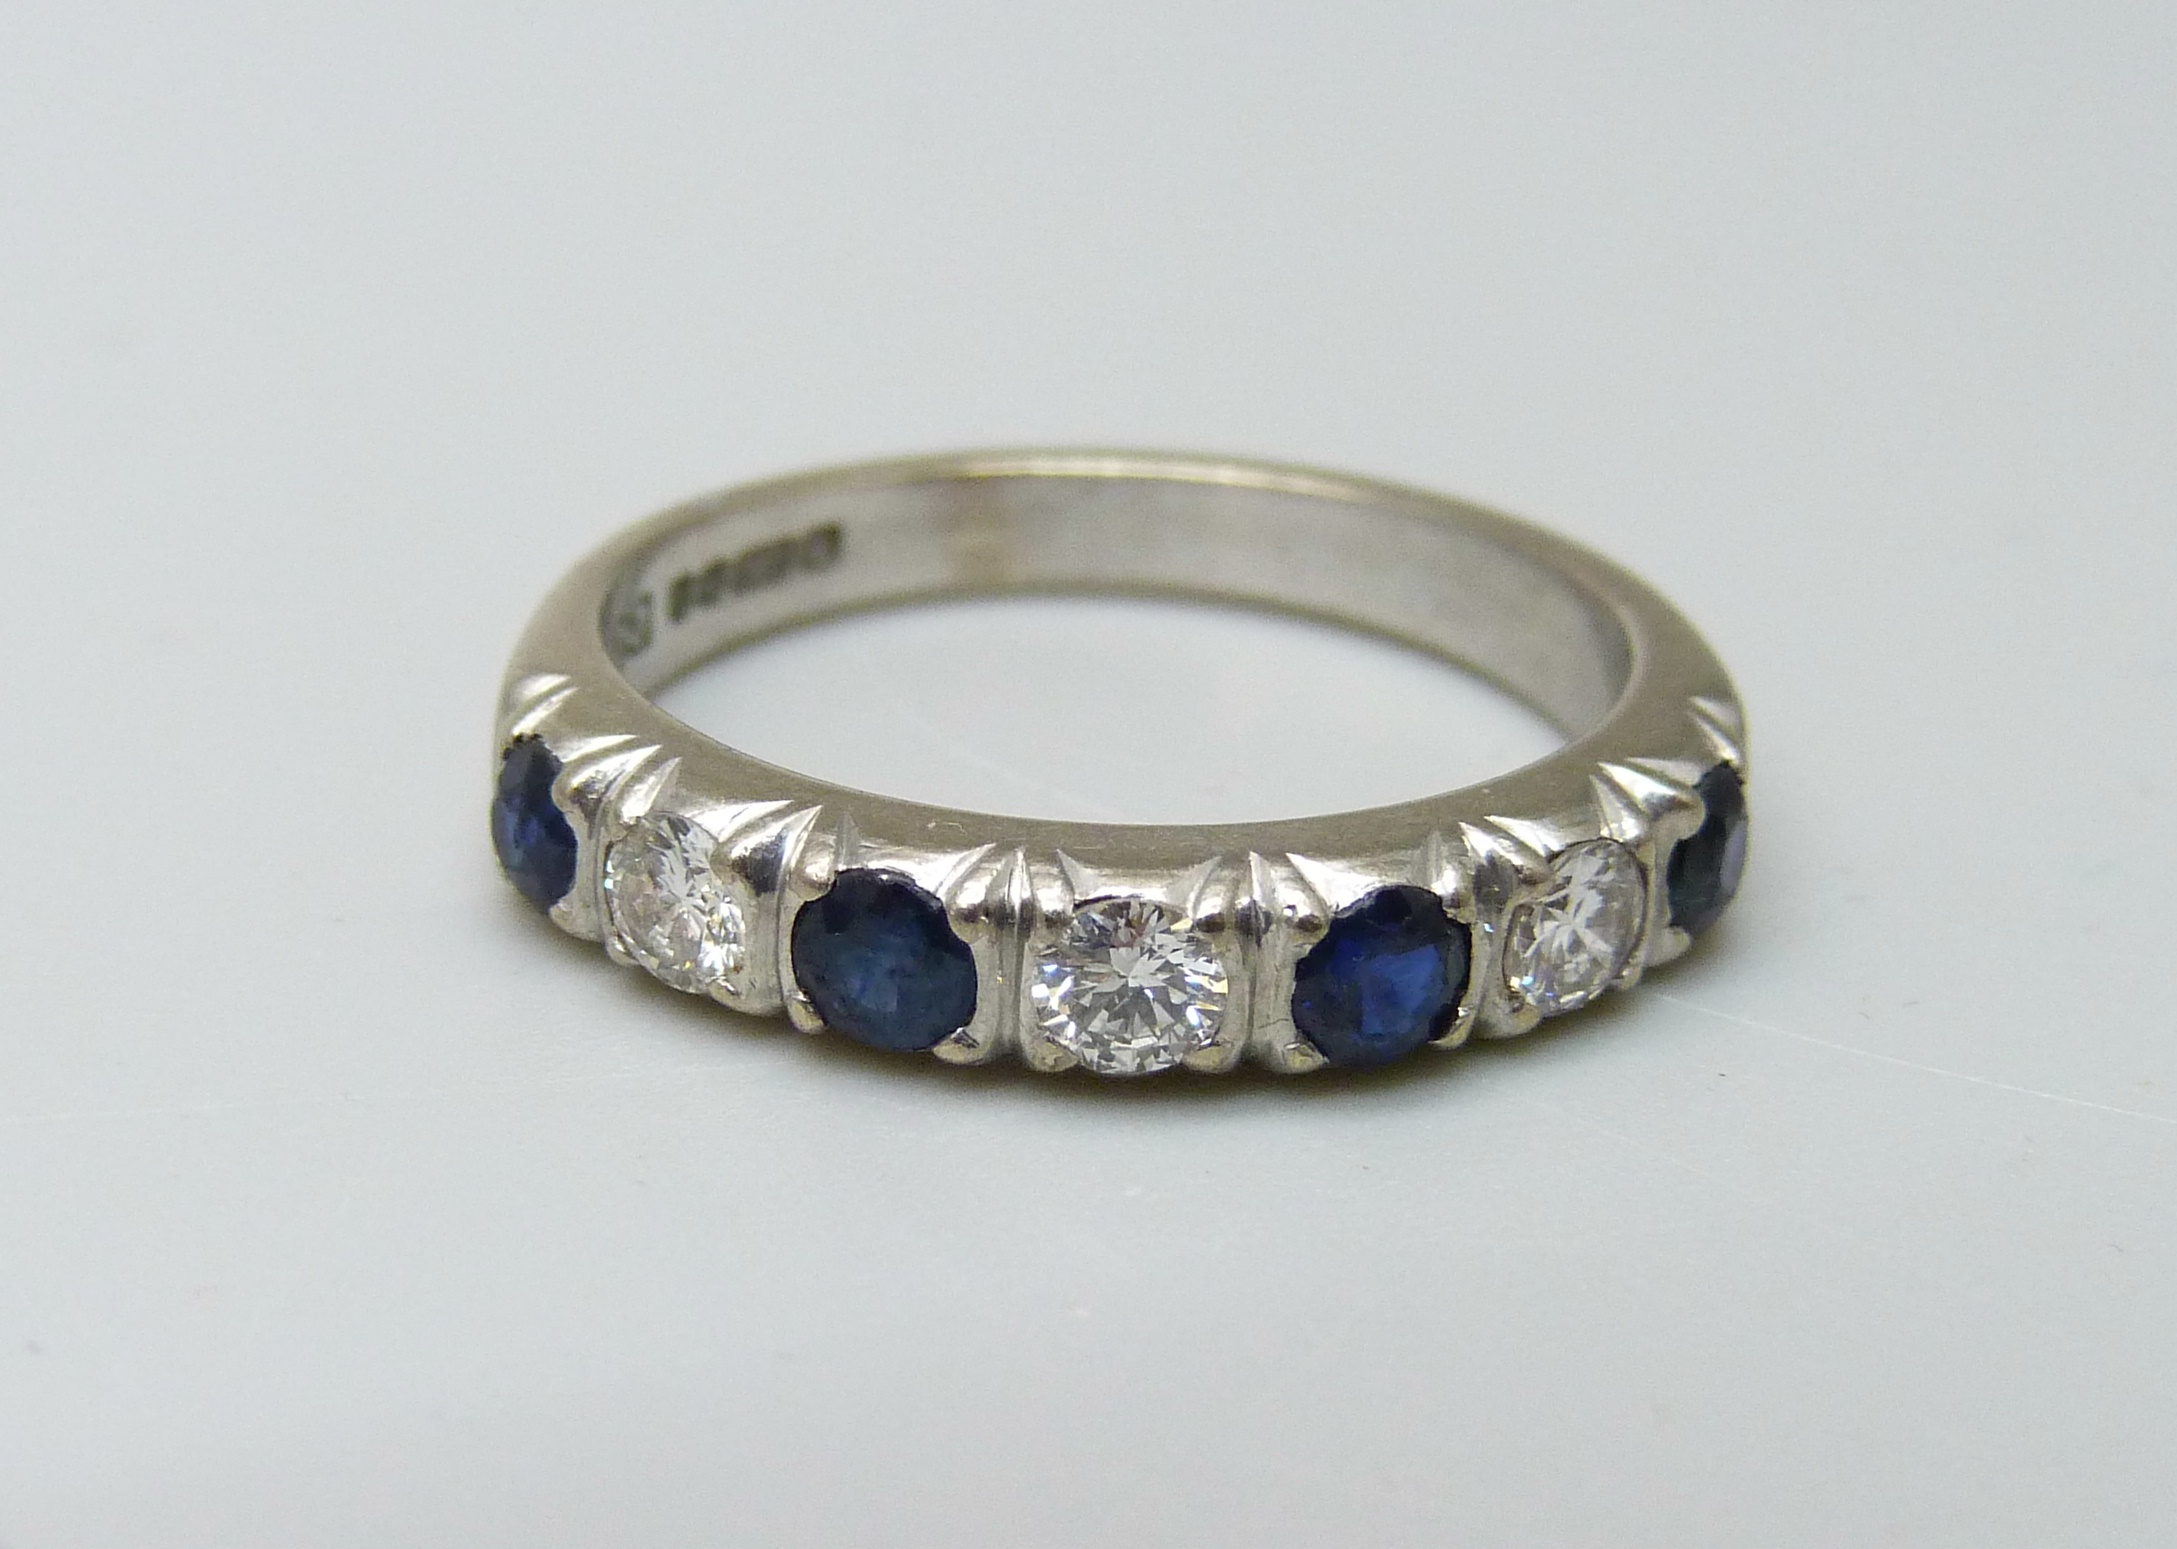 An 18ct white gold, diamond and sapphire ring, Sheffield 1977, 5.1g, Q, over 0.5ct total diamond